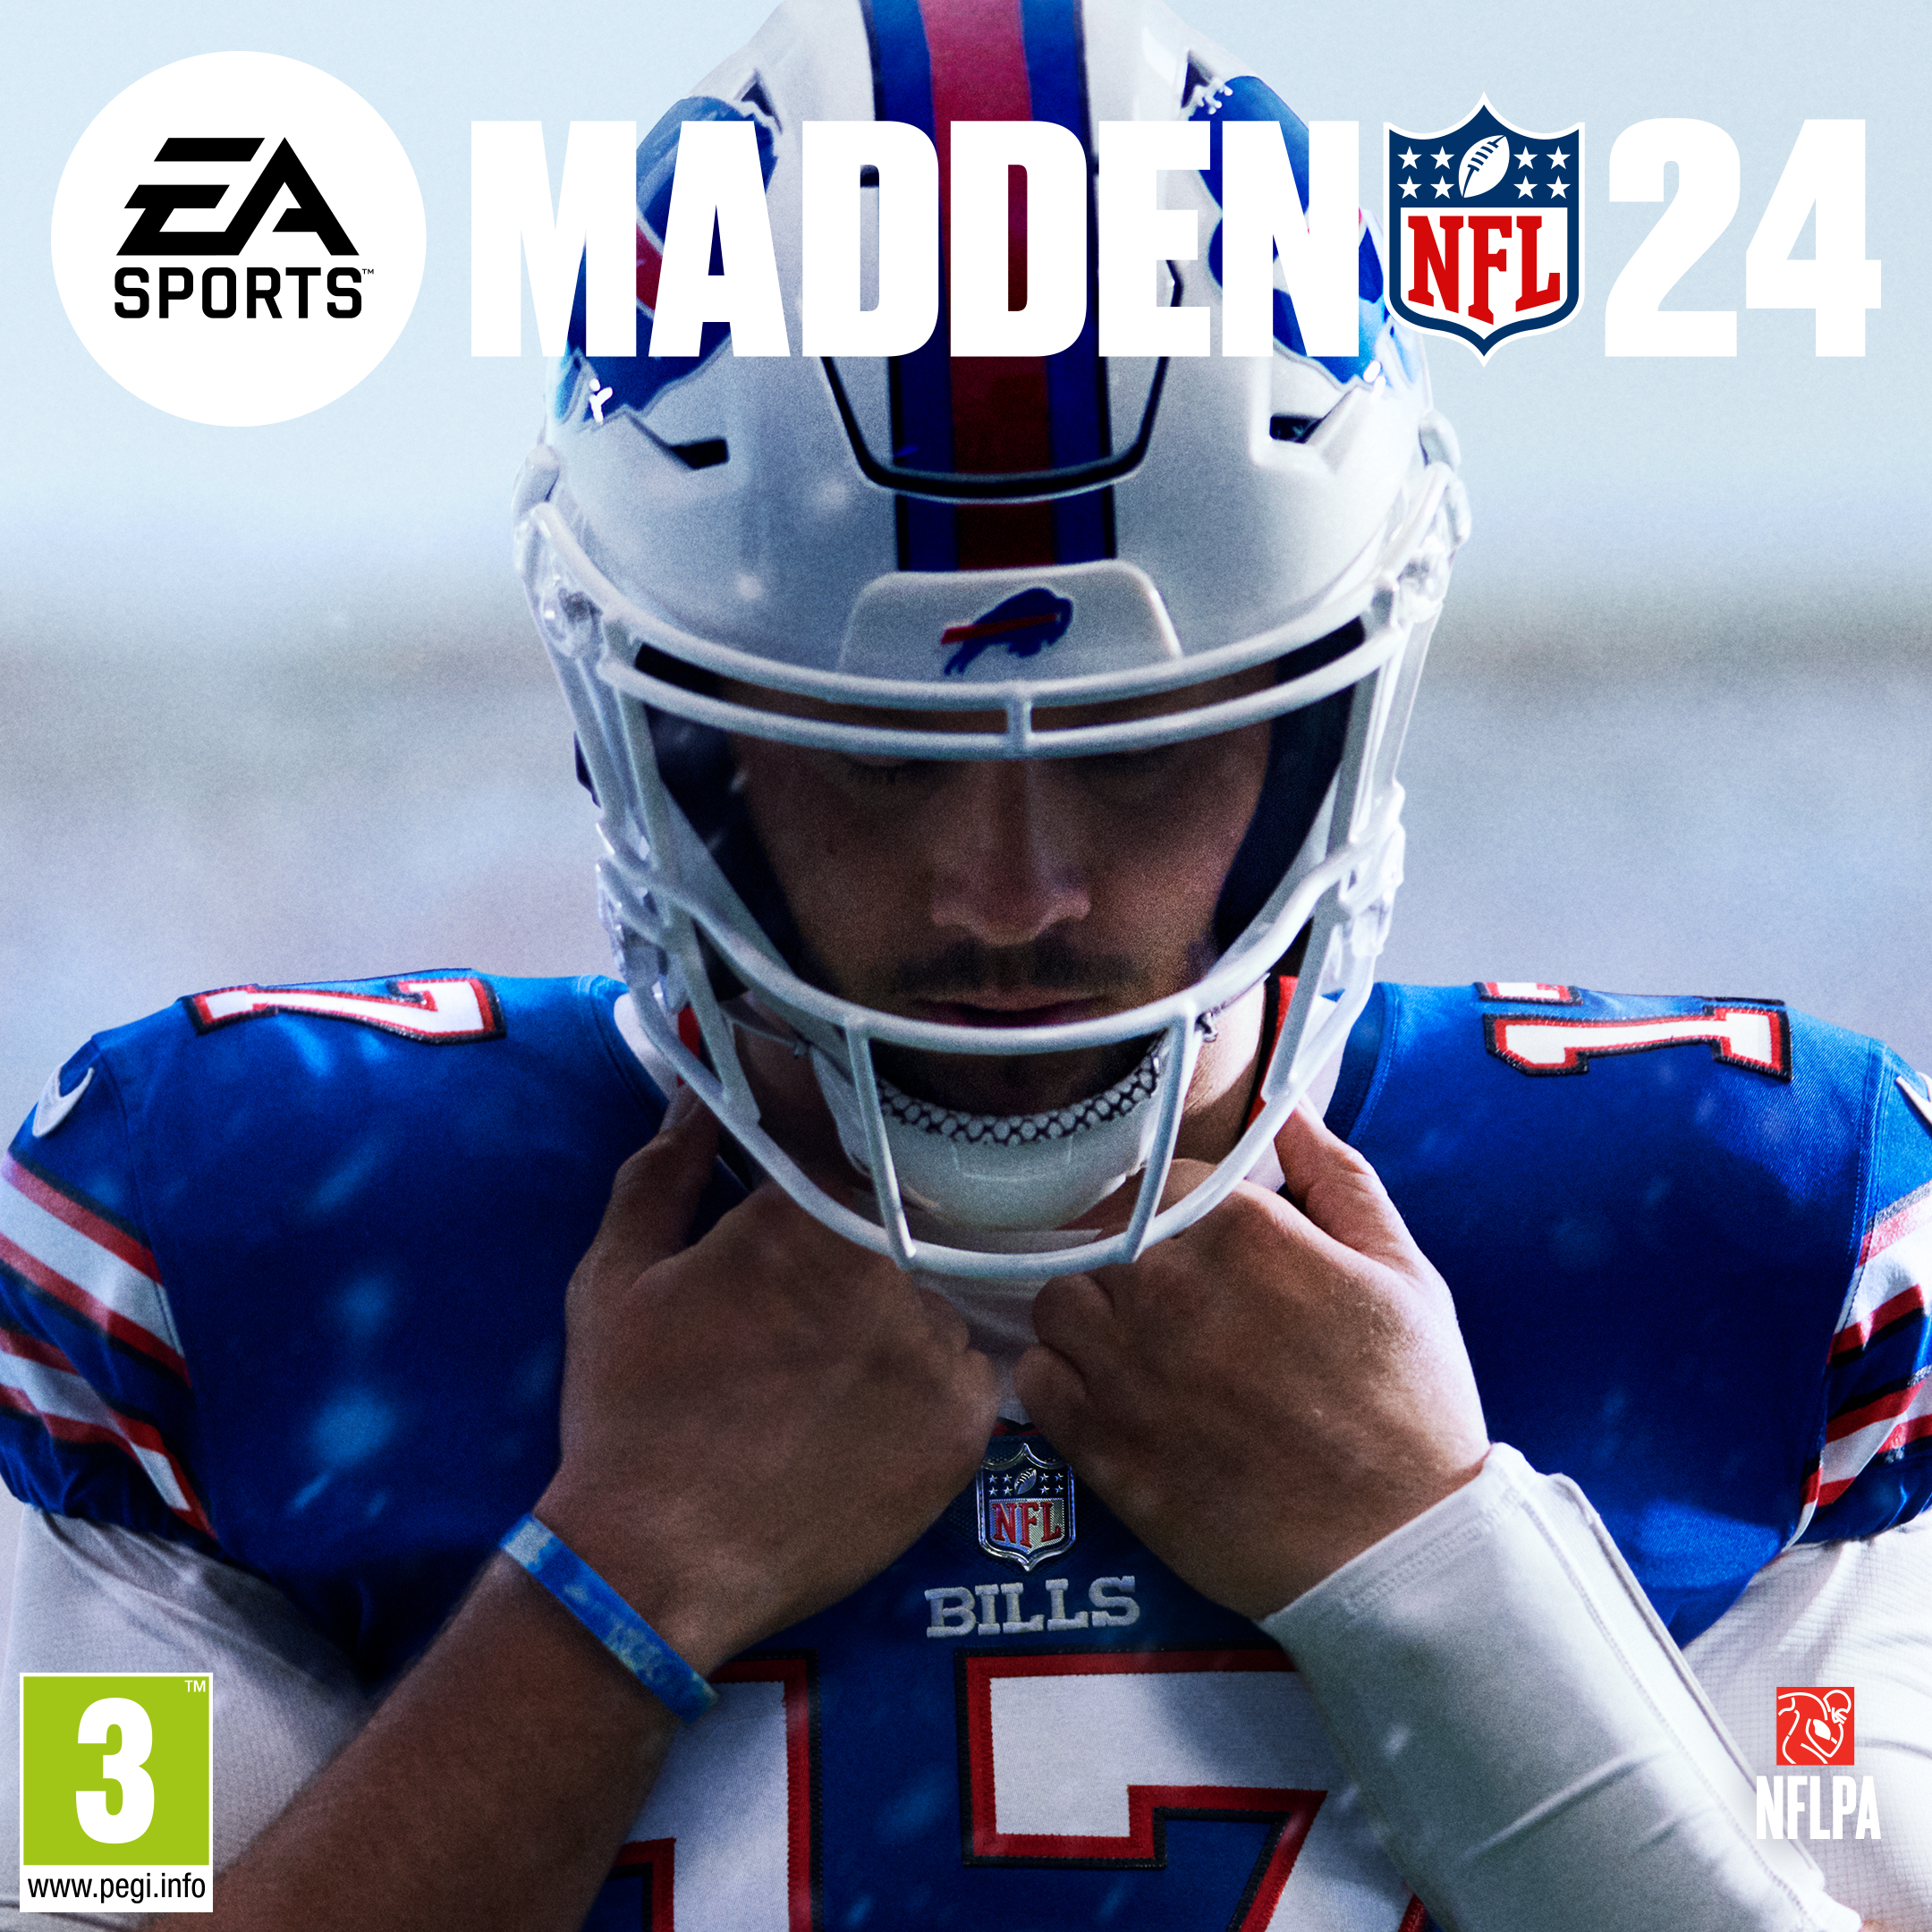 EA SPORTS MADDEN NFL 24 LAUNCHES